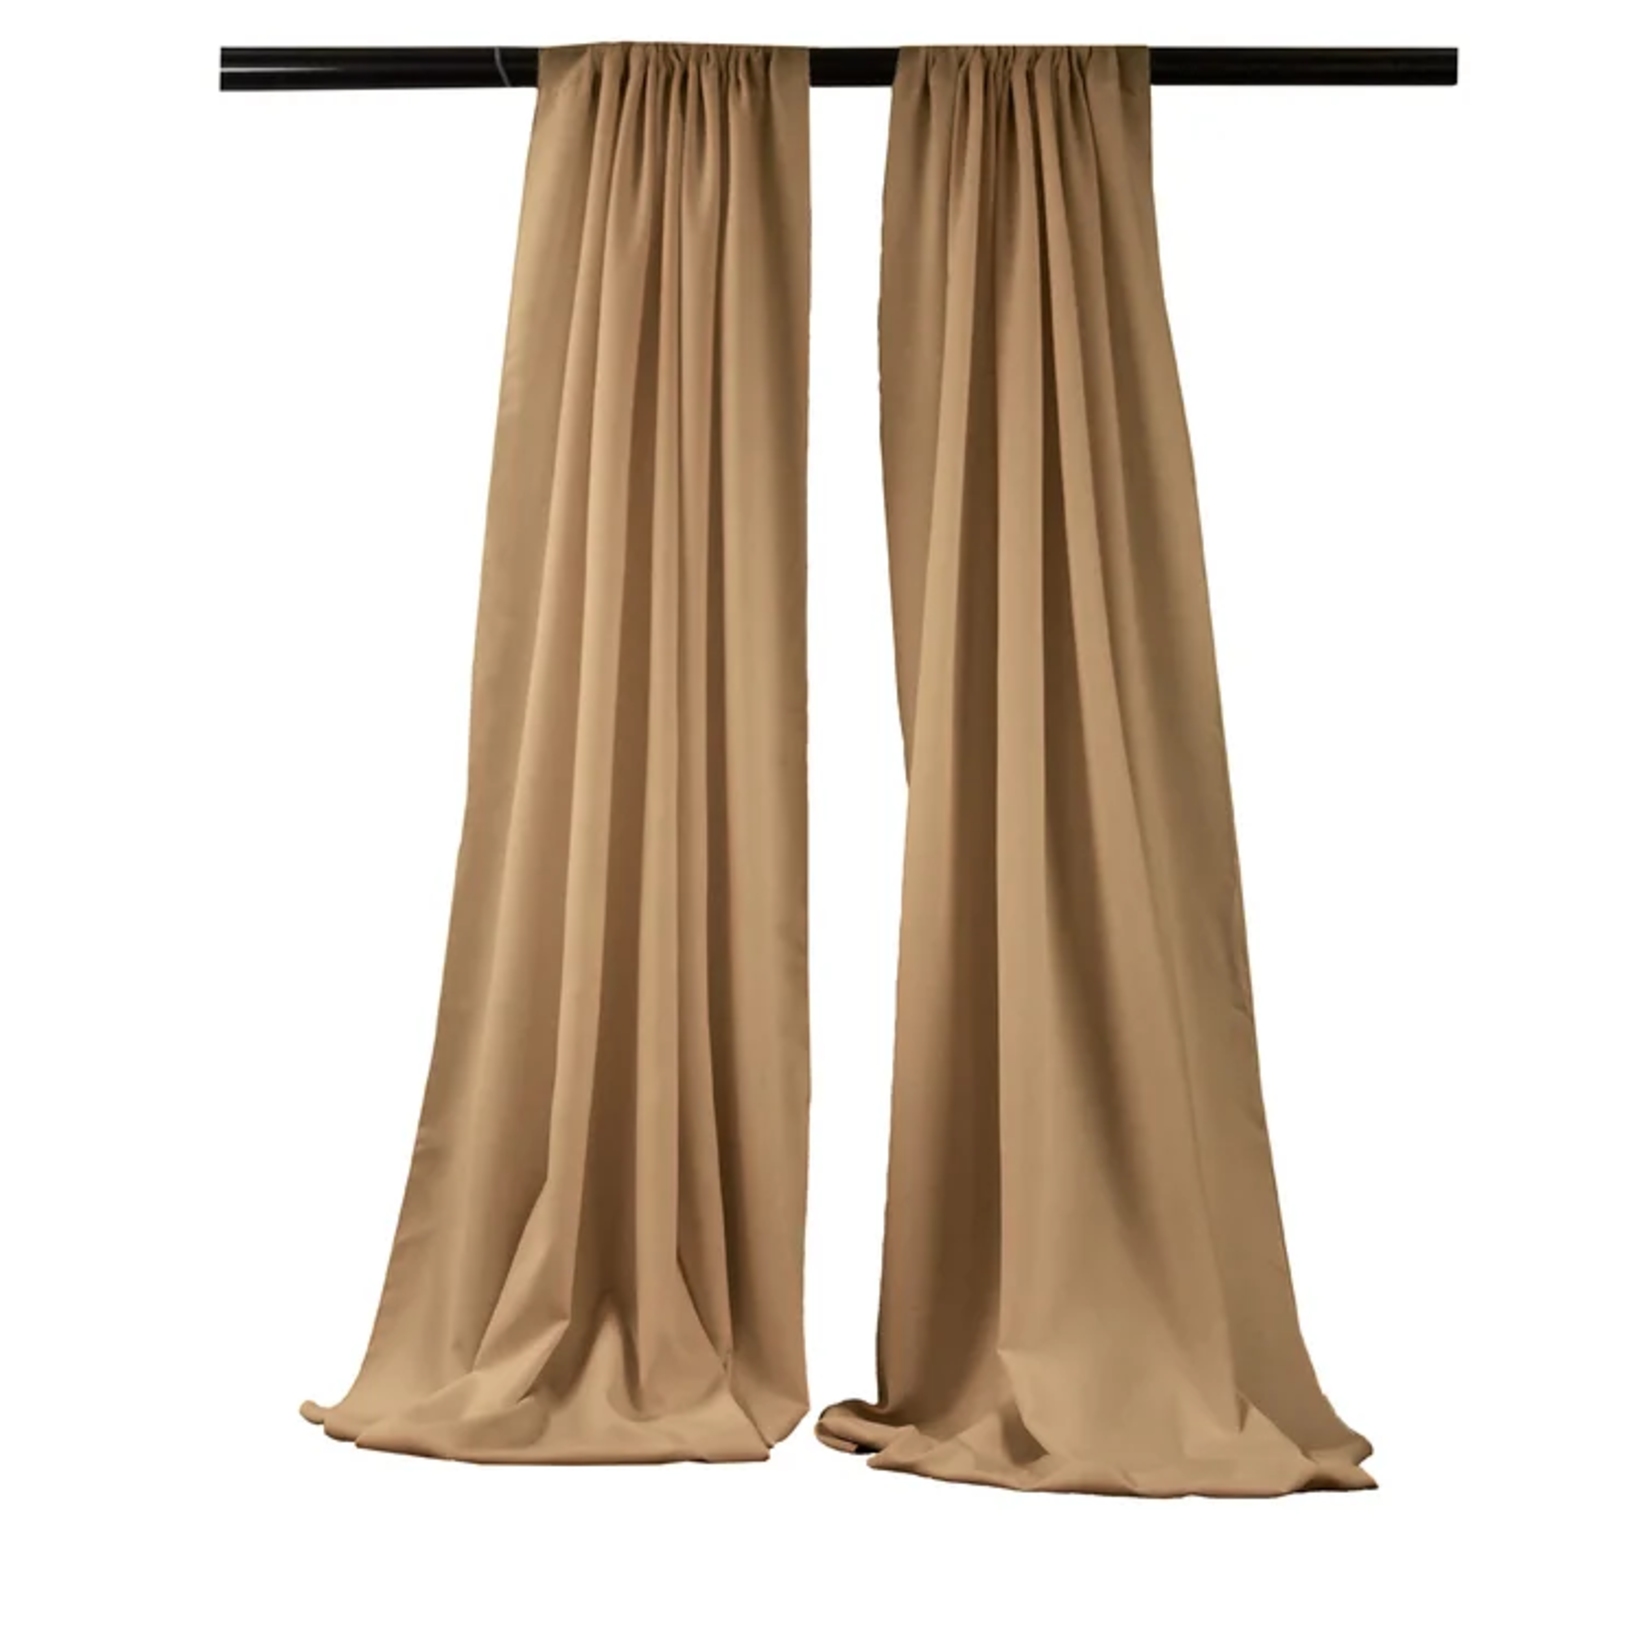 Angiens Solid Sheer Rod Pocket Curtain Panels 58"x96" (Set of 2)